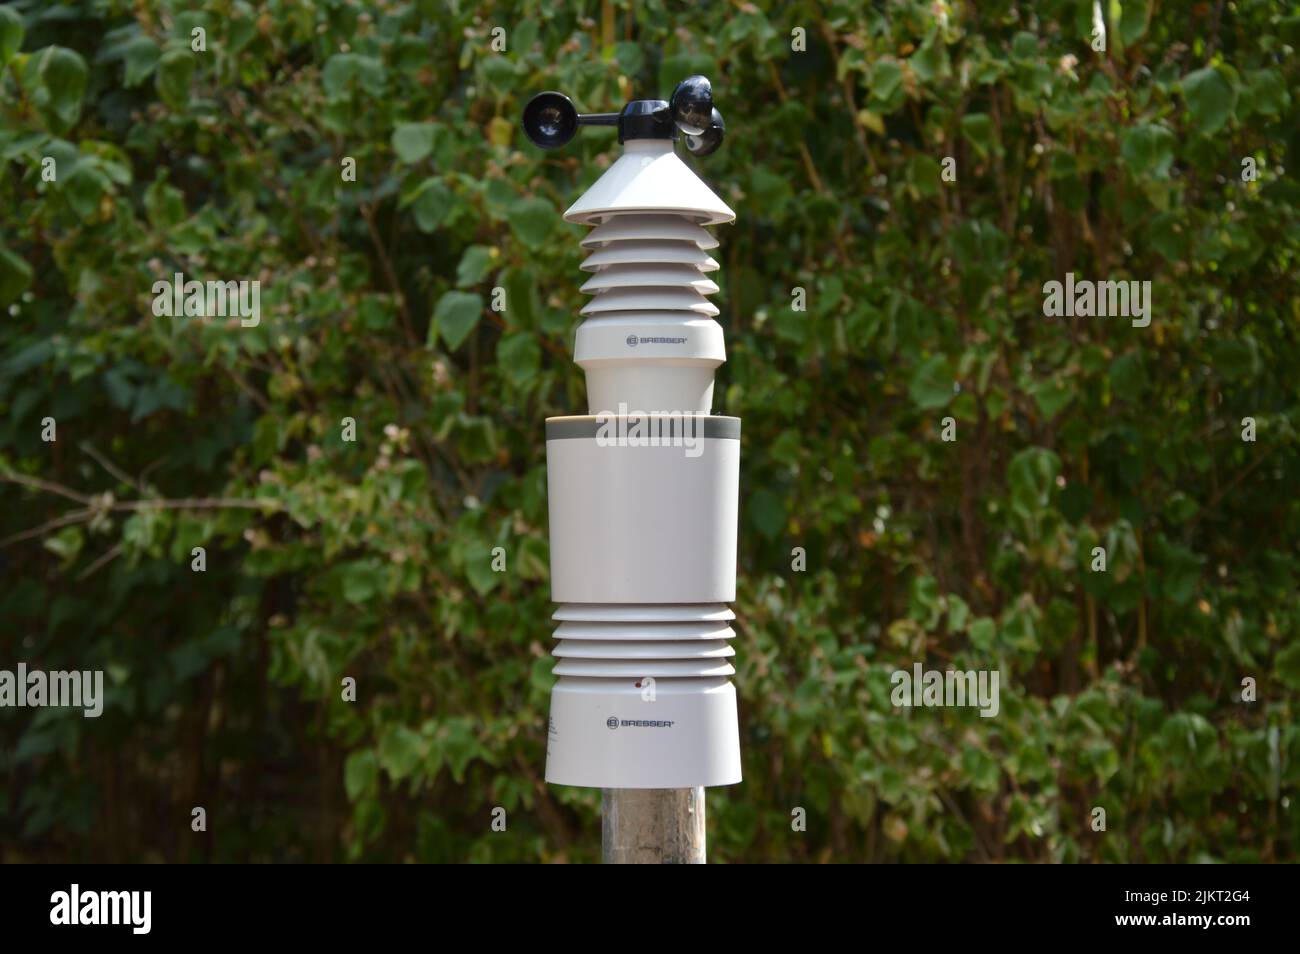 A Weather station in the garden Stock Photo